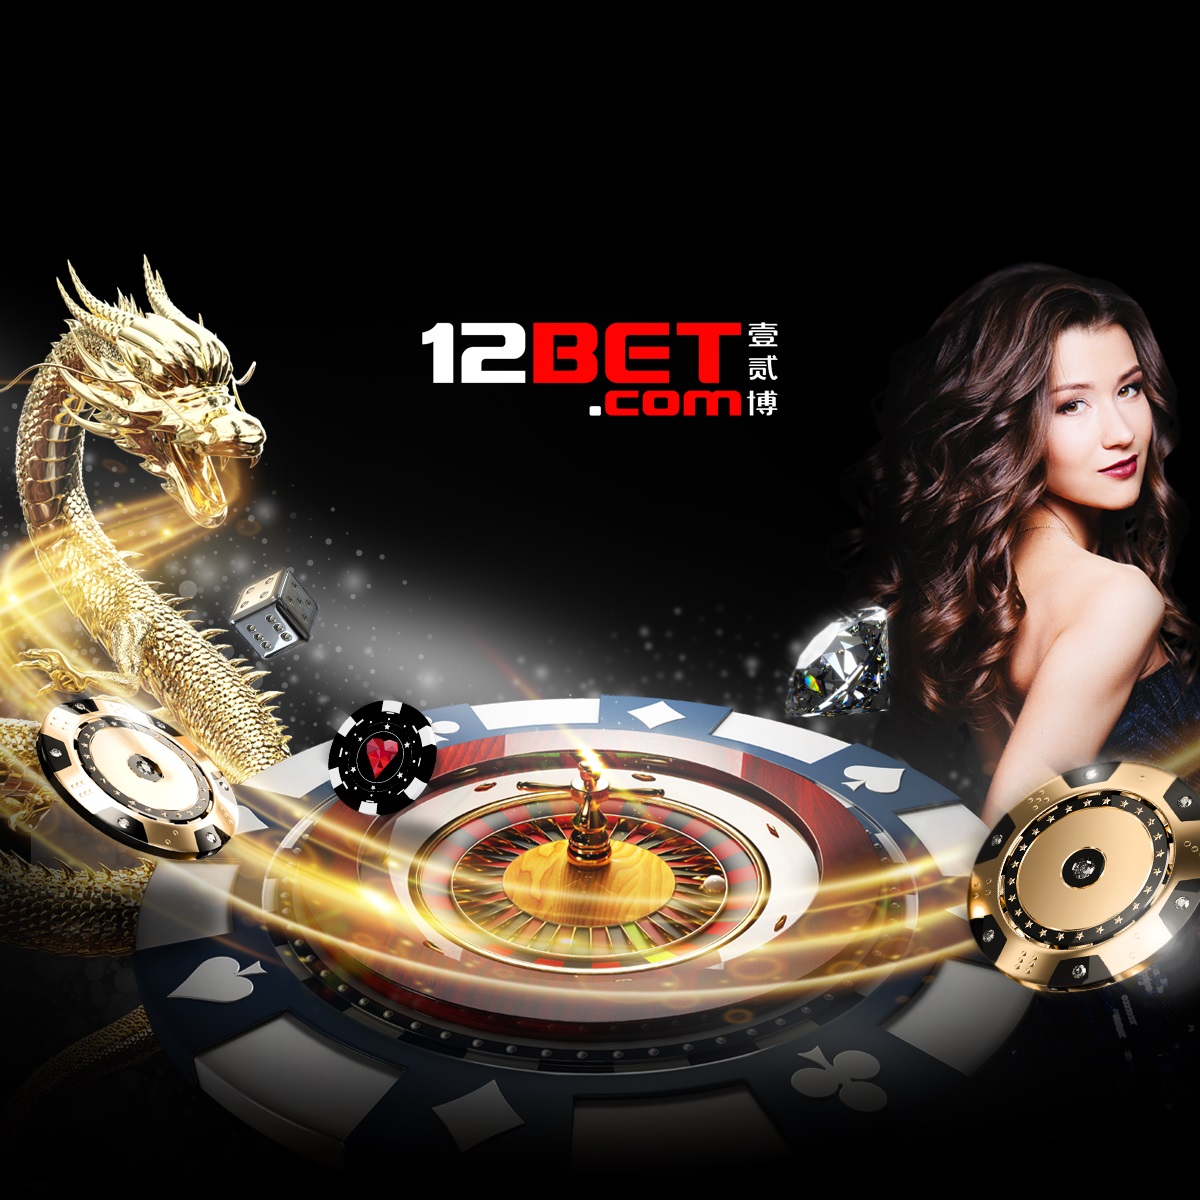 Mobile Casino Slots: The Benefits of Playing on the Go